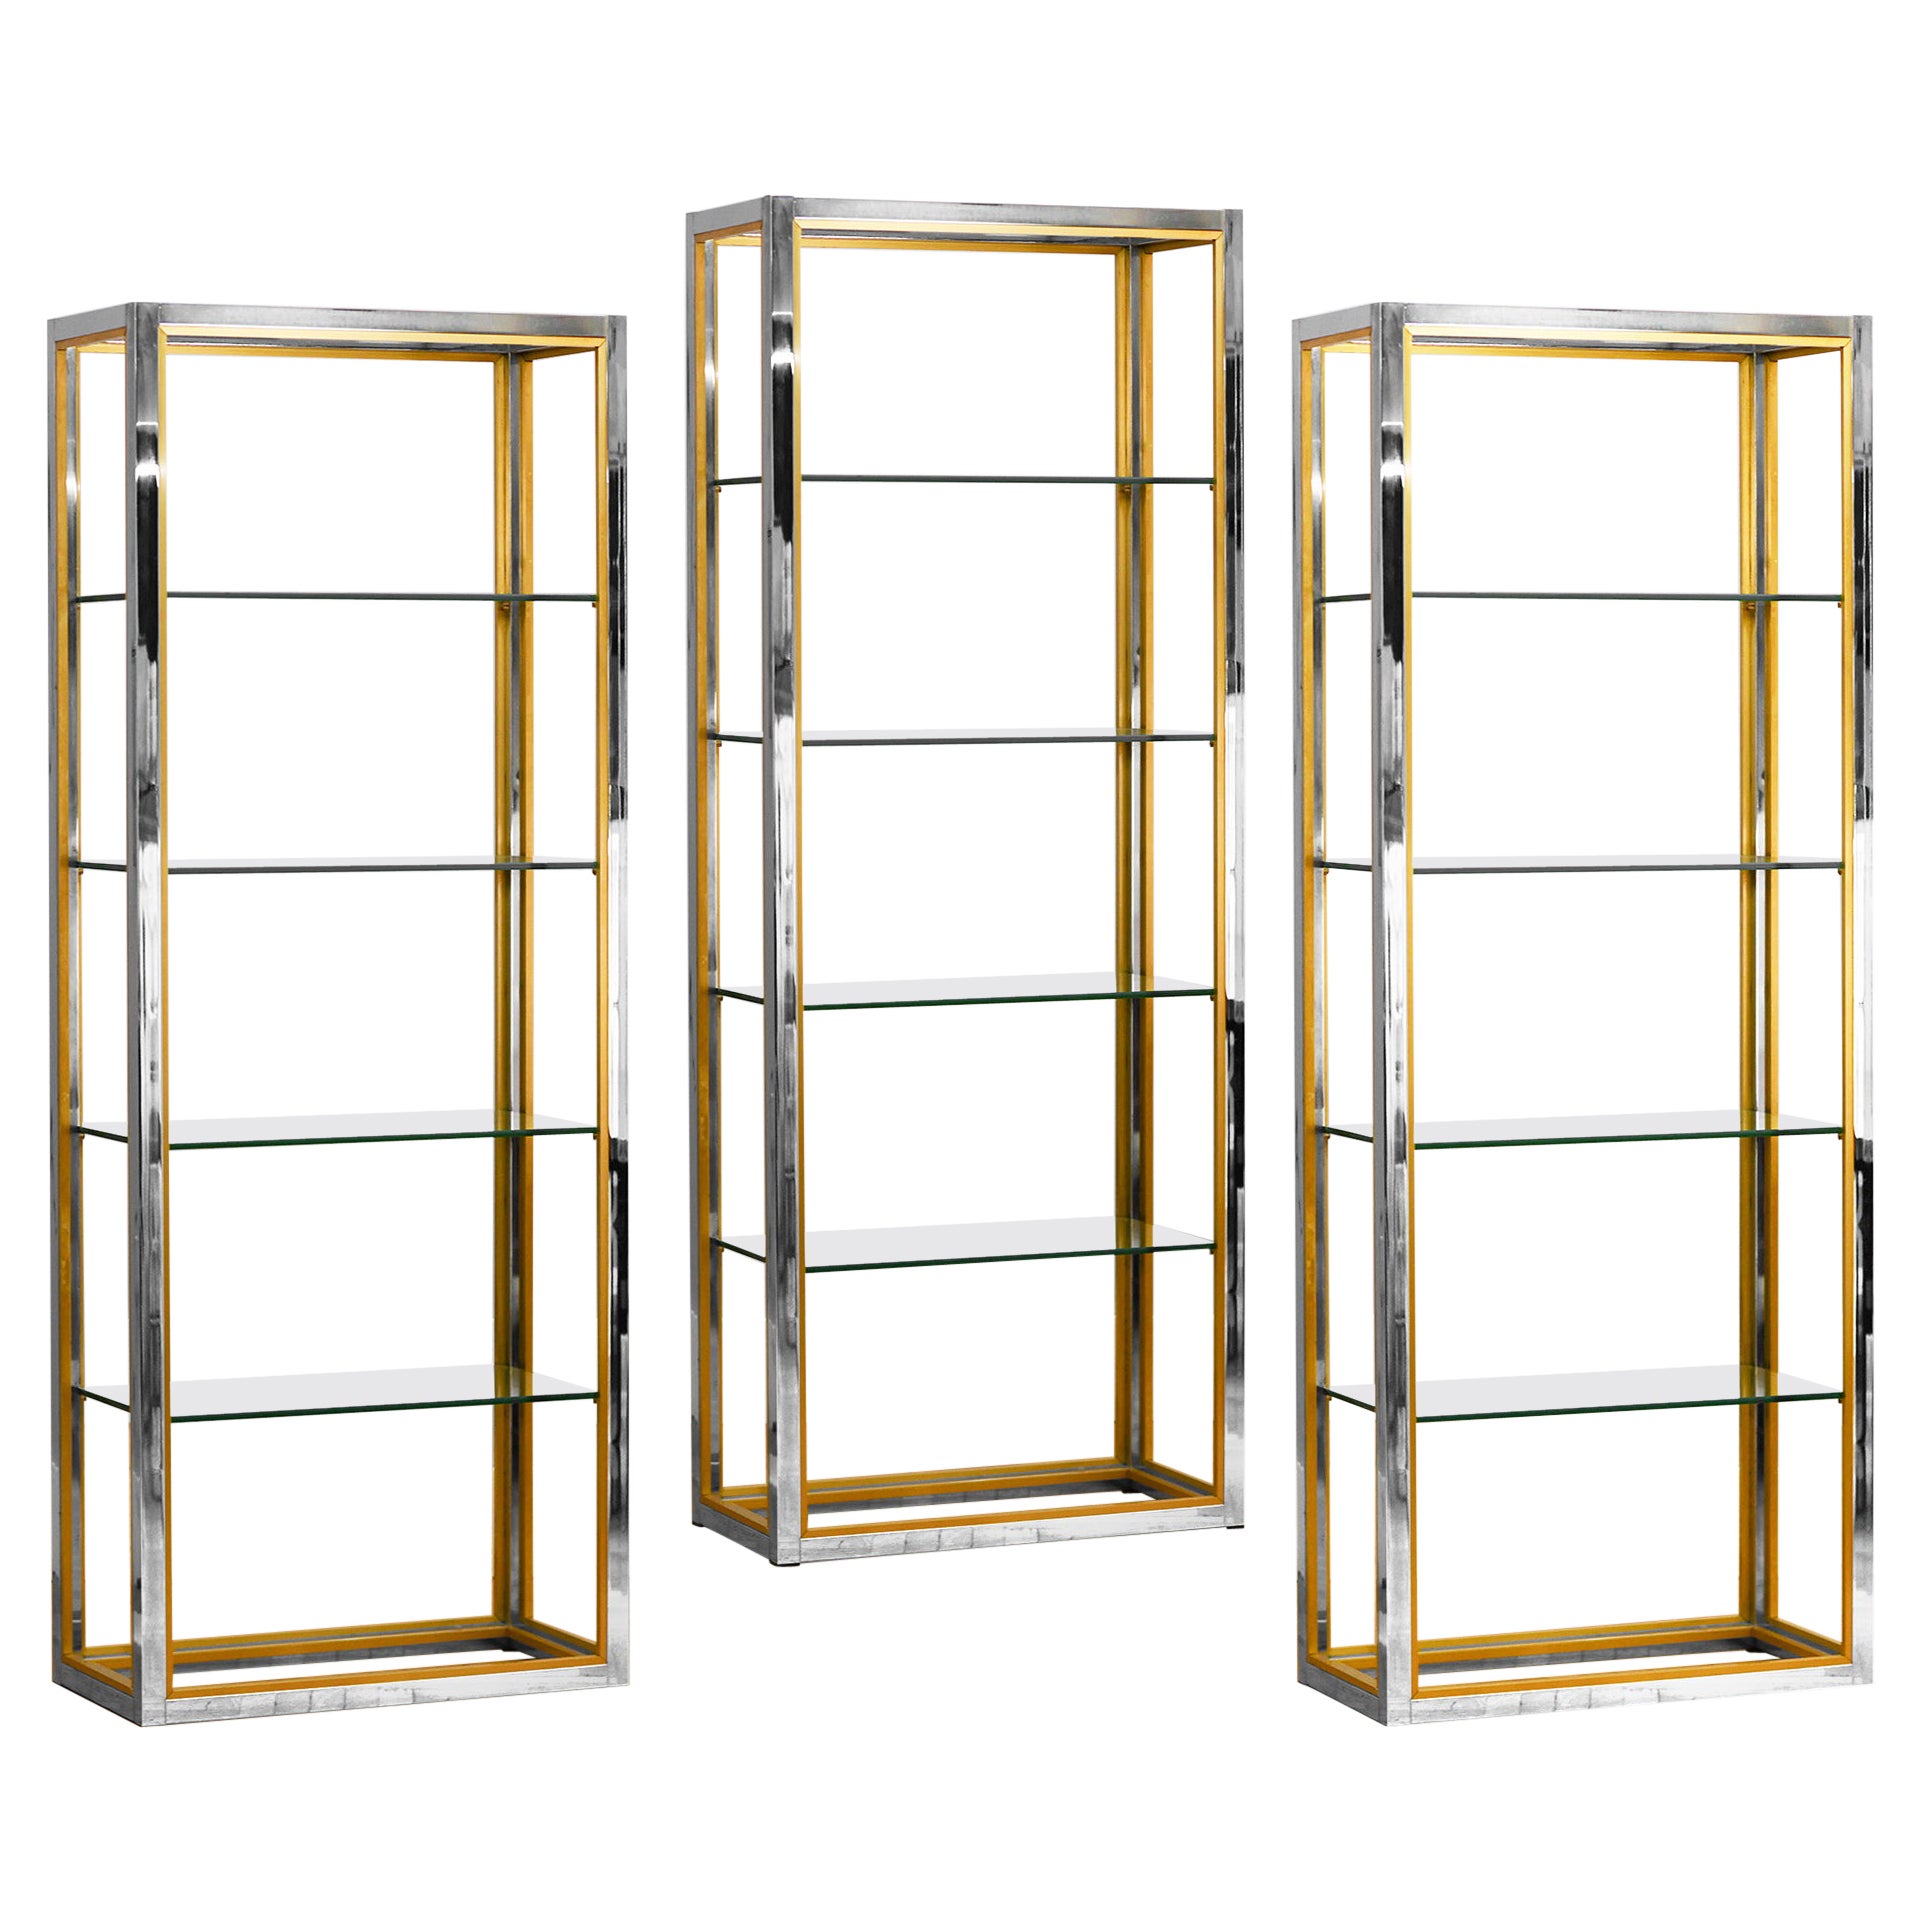 Brass and chromed metal bookcases with glass shelves, Italy 1980